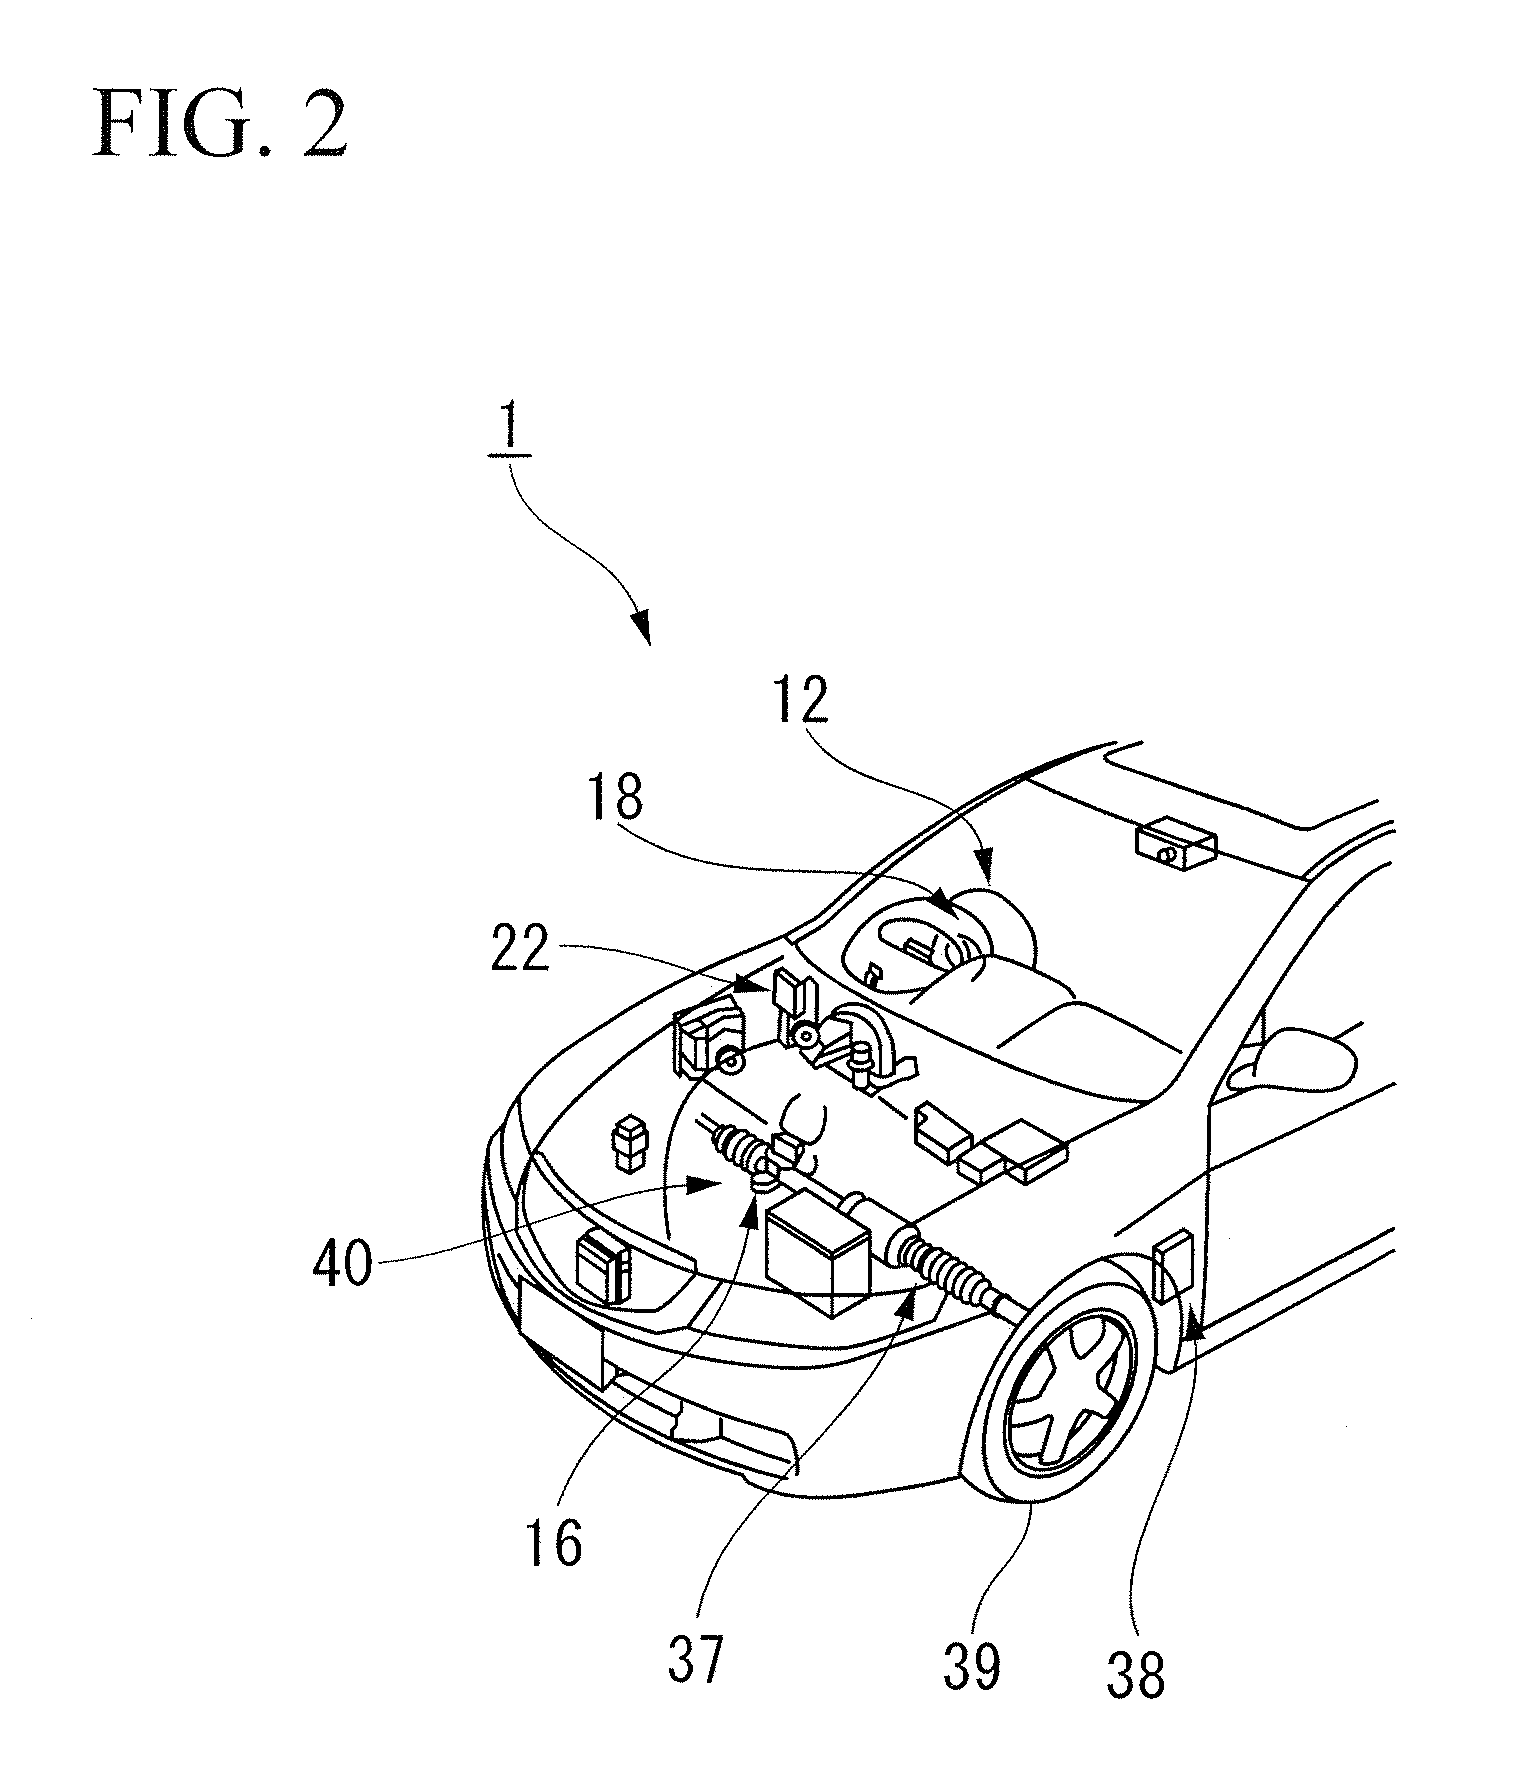 Steering retention state judging device, driver wakefulness predicting device, and correct course keeping device